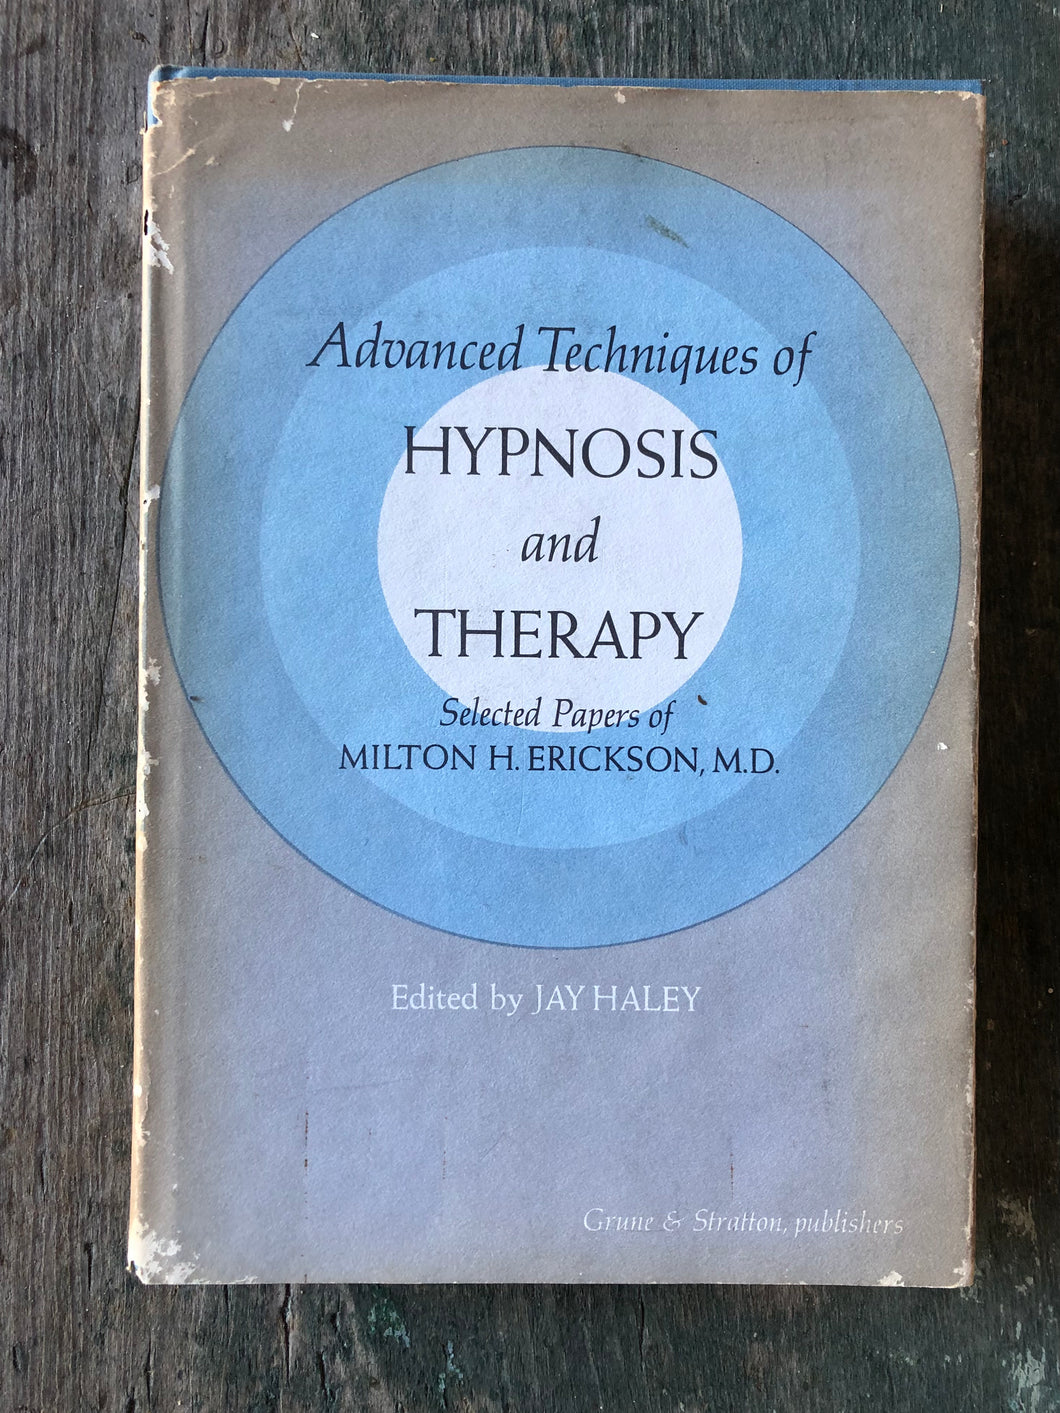 Advanced Techniques of Hypnosis and Therapy. Selected Papers of Milton H. Erickson edited by Jay Haley